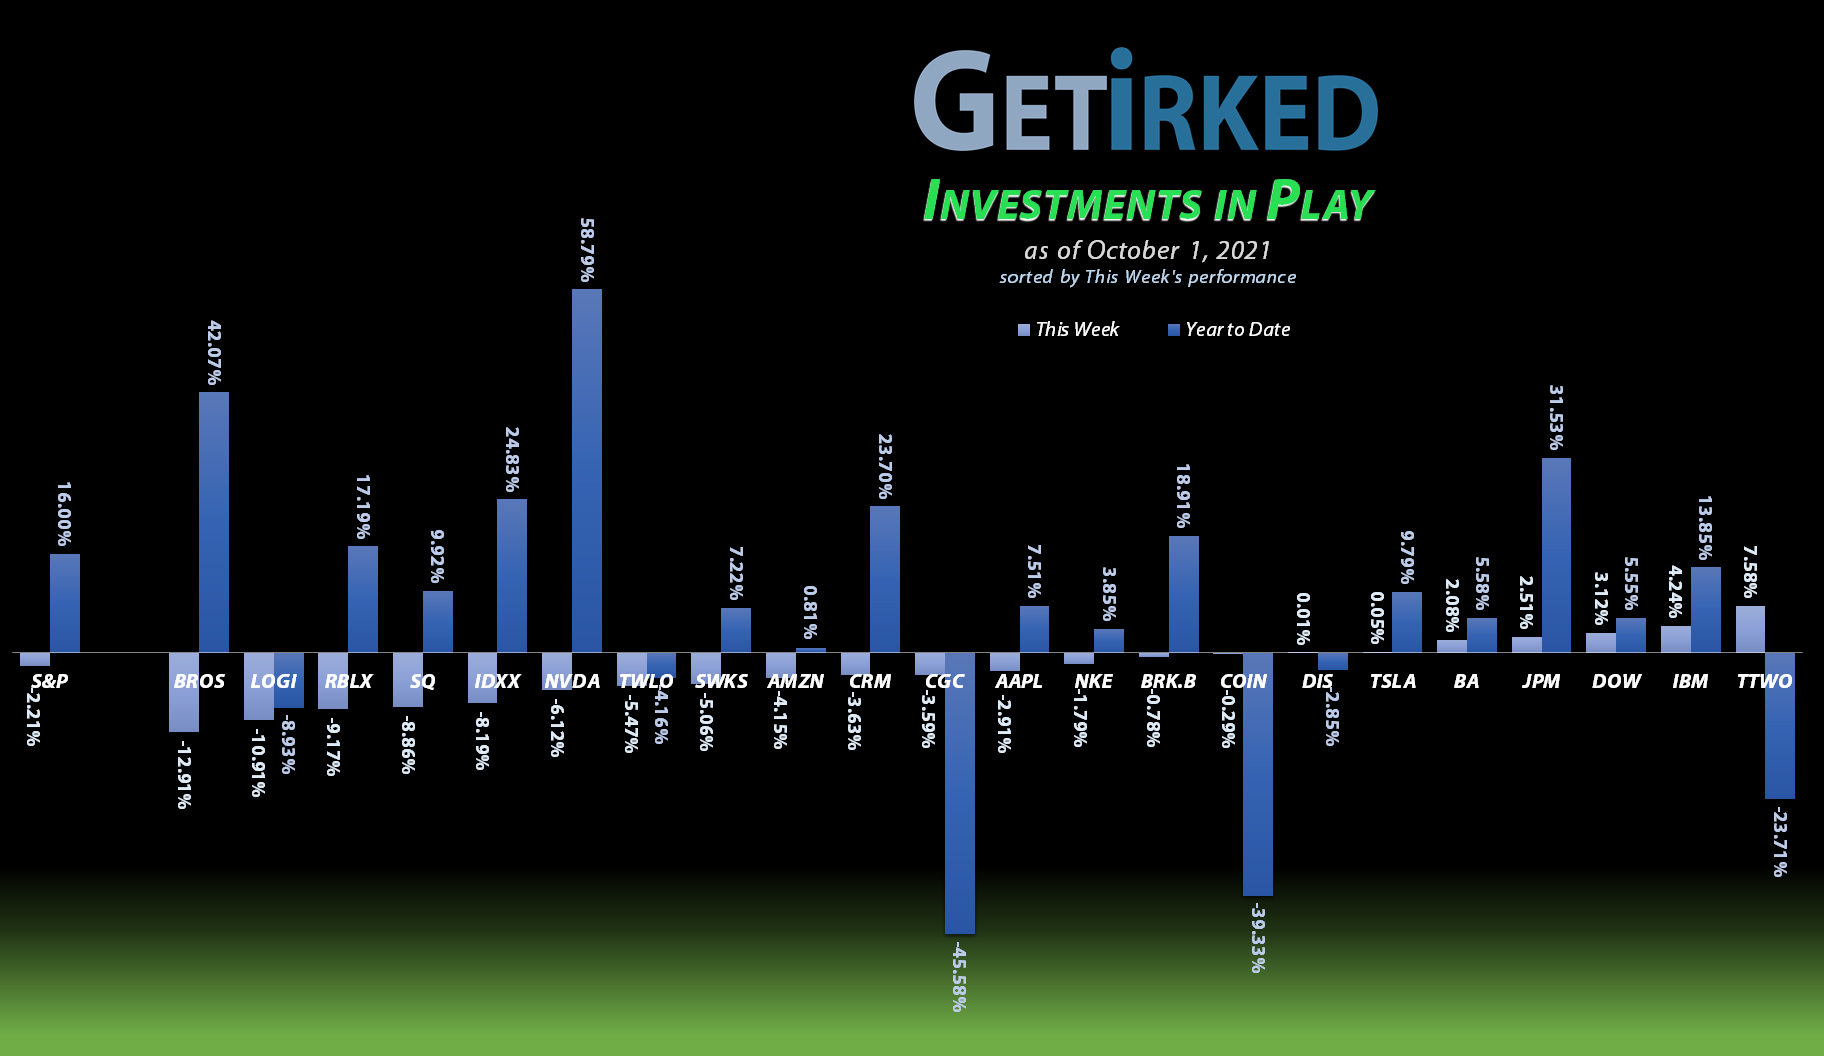 Get Irked - Investments in Play - October 1, 2021